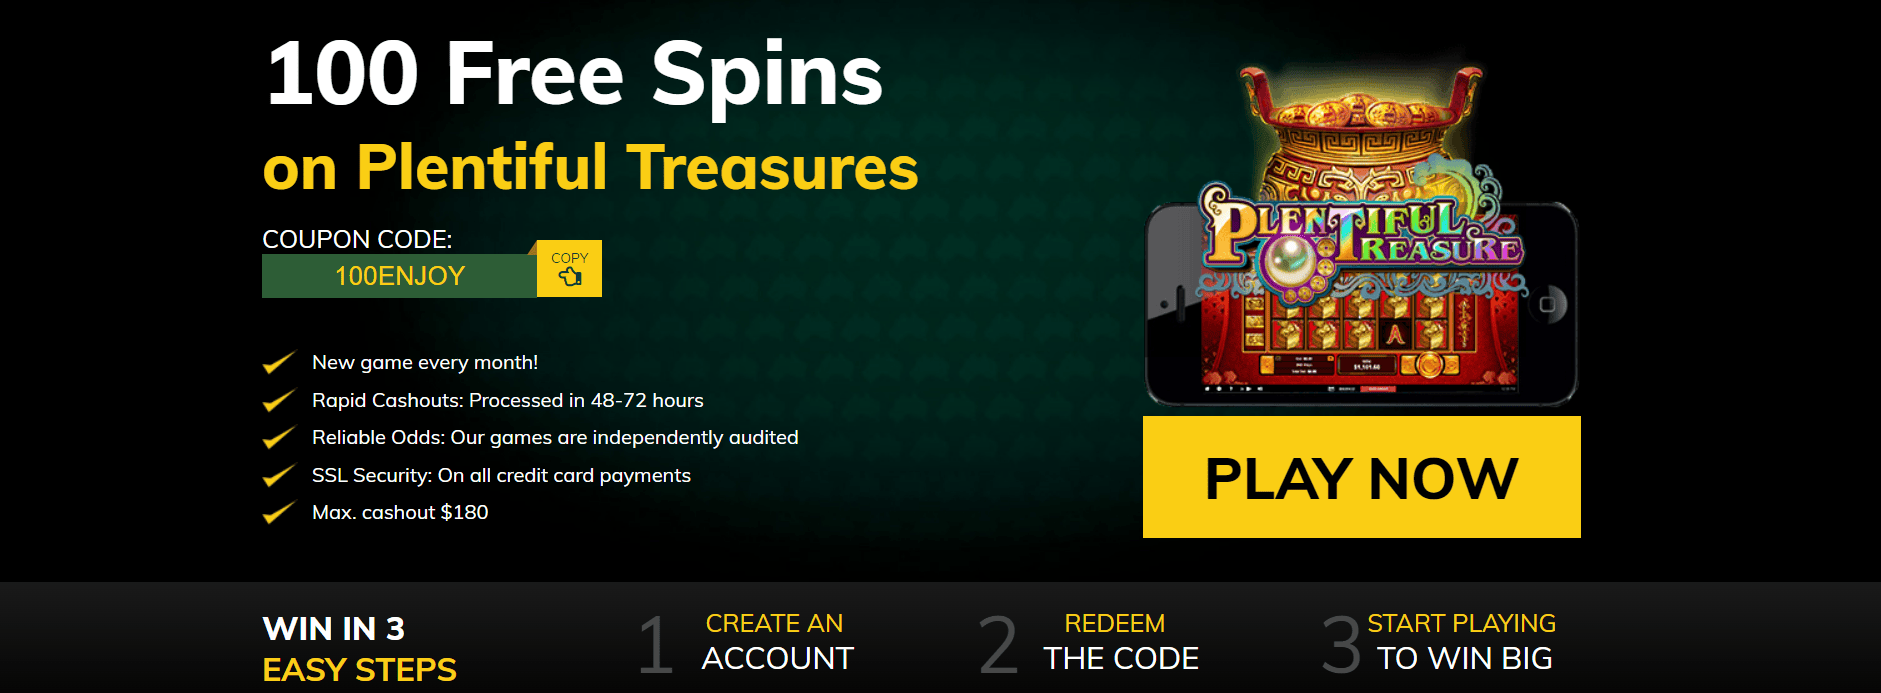 How to Claim 80 Free Spins on Sign Up